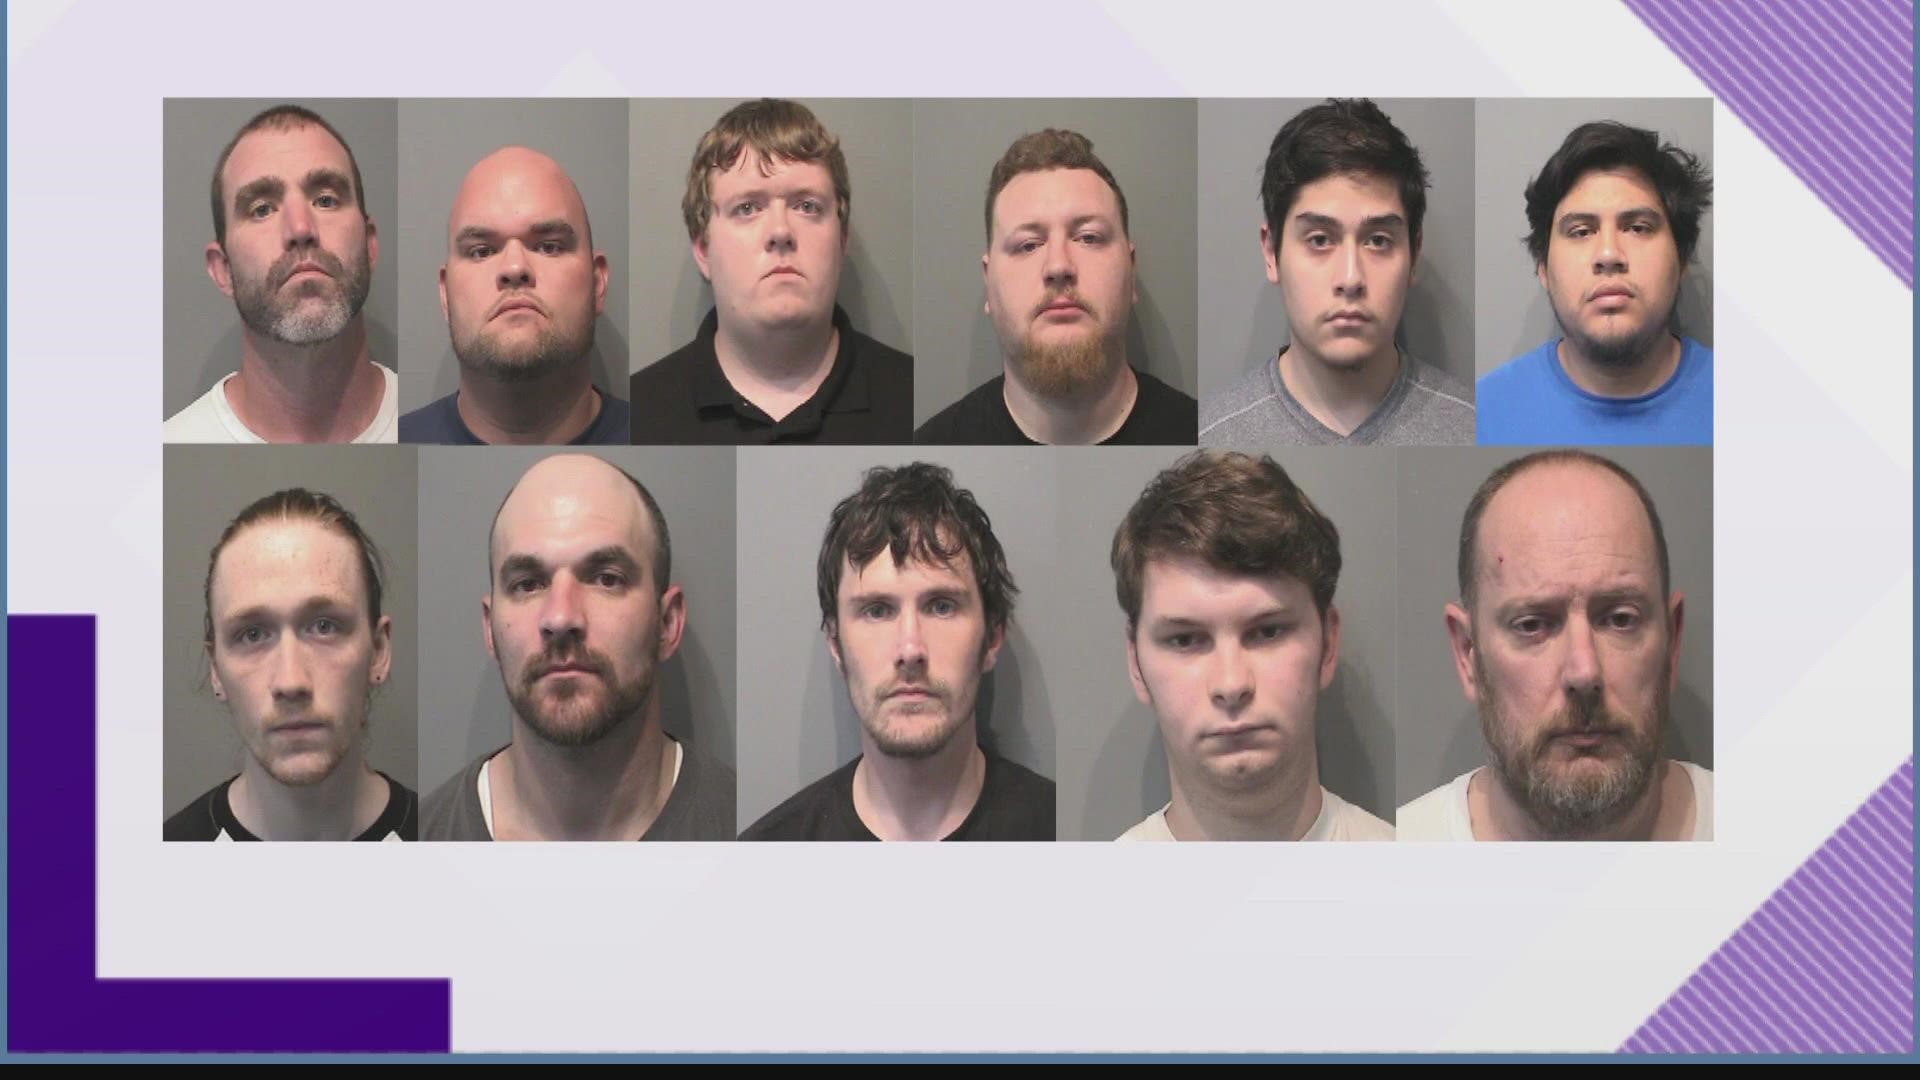 The men range in age from 19 to 49, and were all arrested in Johnson County.